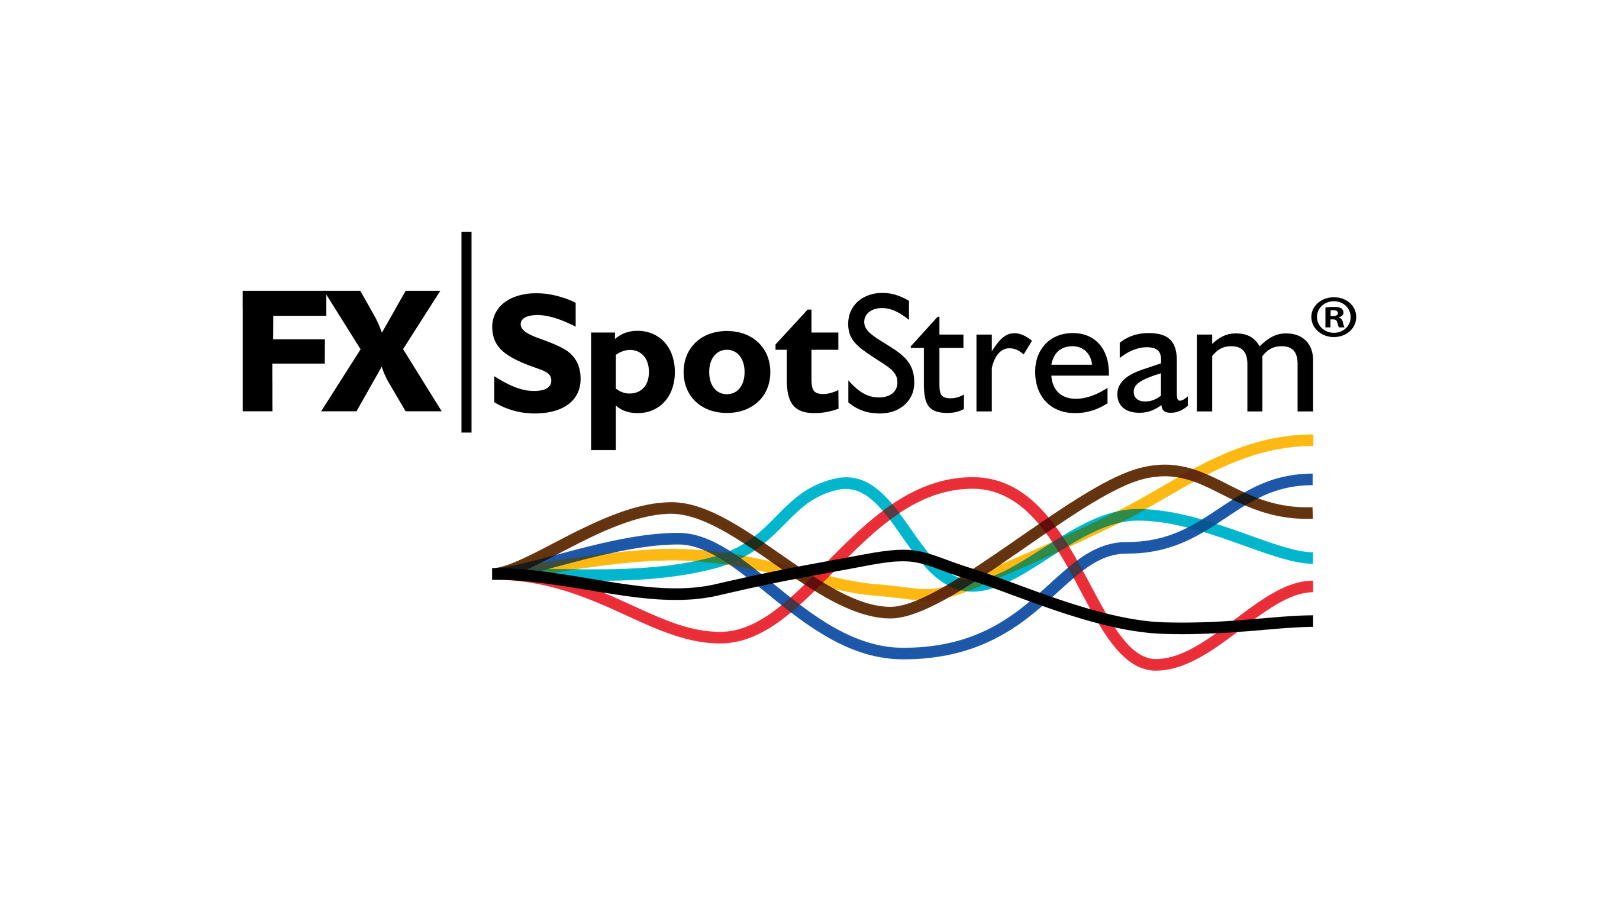 FXSpotStream February Volumes Reach All-Time High